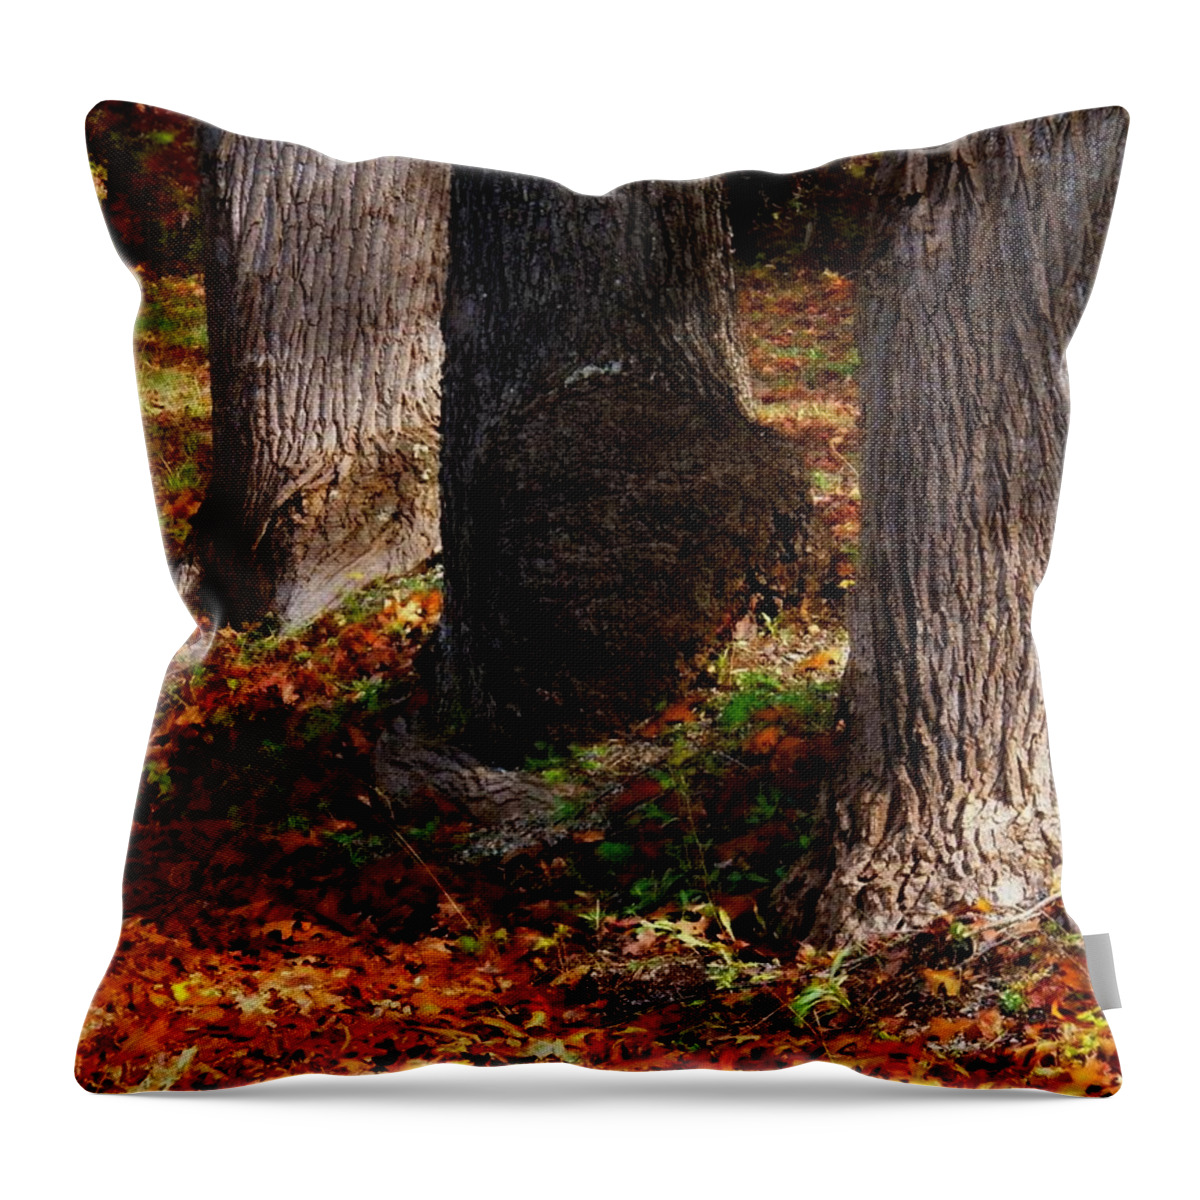 Autumn Throw Pillow featuring the photograph Trunk and Leaves by Joyce Kimble Smith